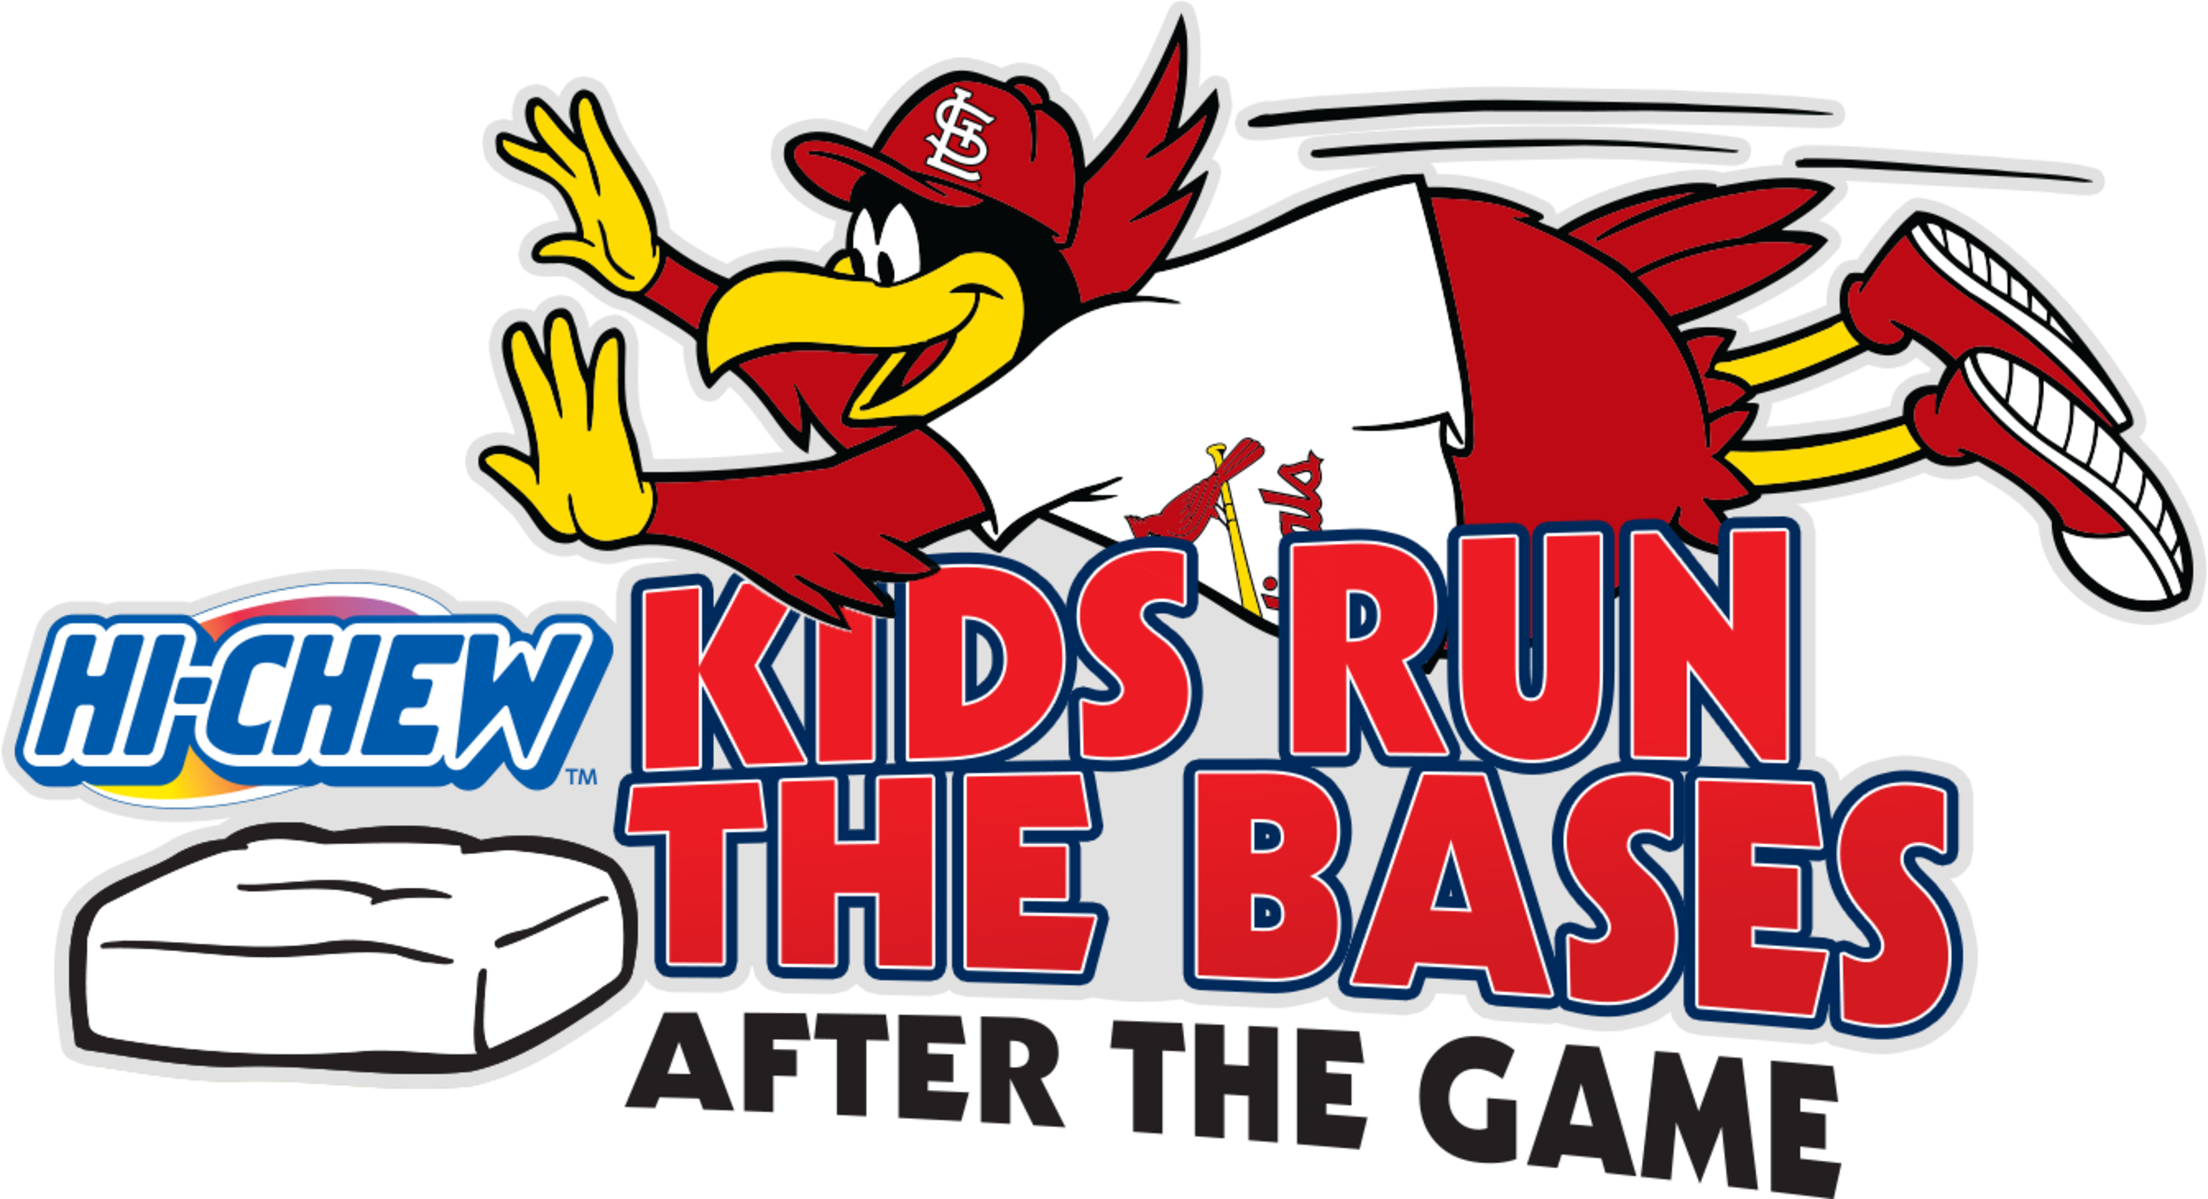 Go Cards! Learn about the Fall Fundraiser and the 2023 St. Louis Cardinals  calendar